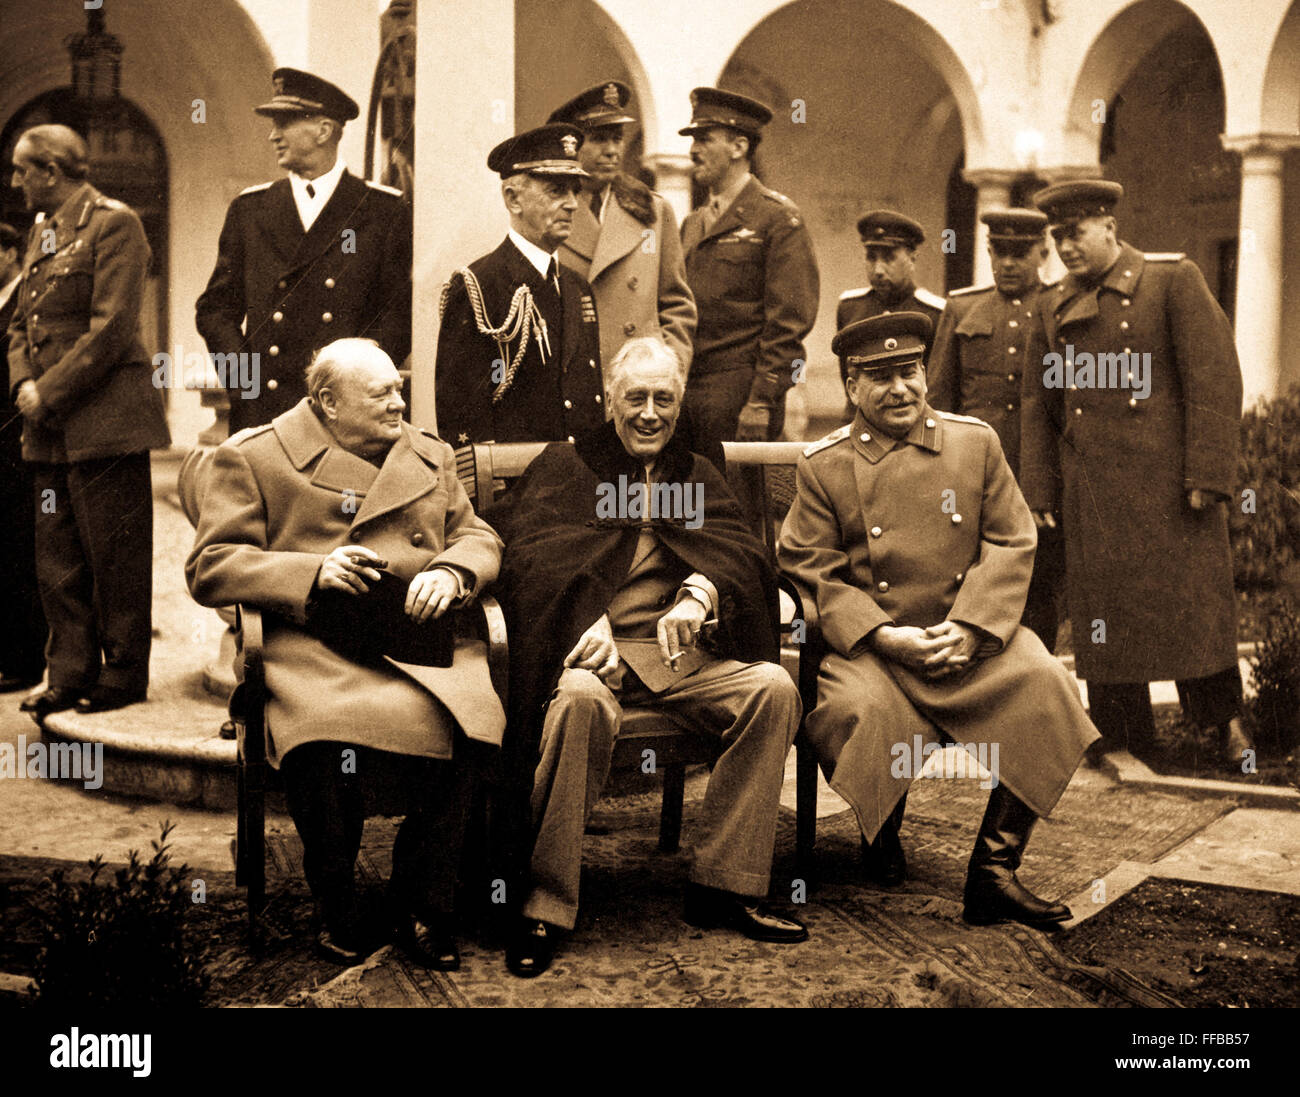 Conference of the Big Three at Yalta makes final plans for the defeat of Germany.  Here the 'Big Three' sit on the patio together, Prime Minister Winston S. Churchill, President Franklin D. Roosevelt, and Premier Josef Stalin.  February 1945. Stock Photo